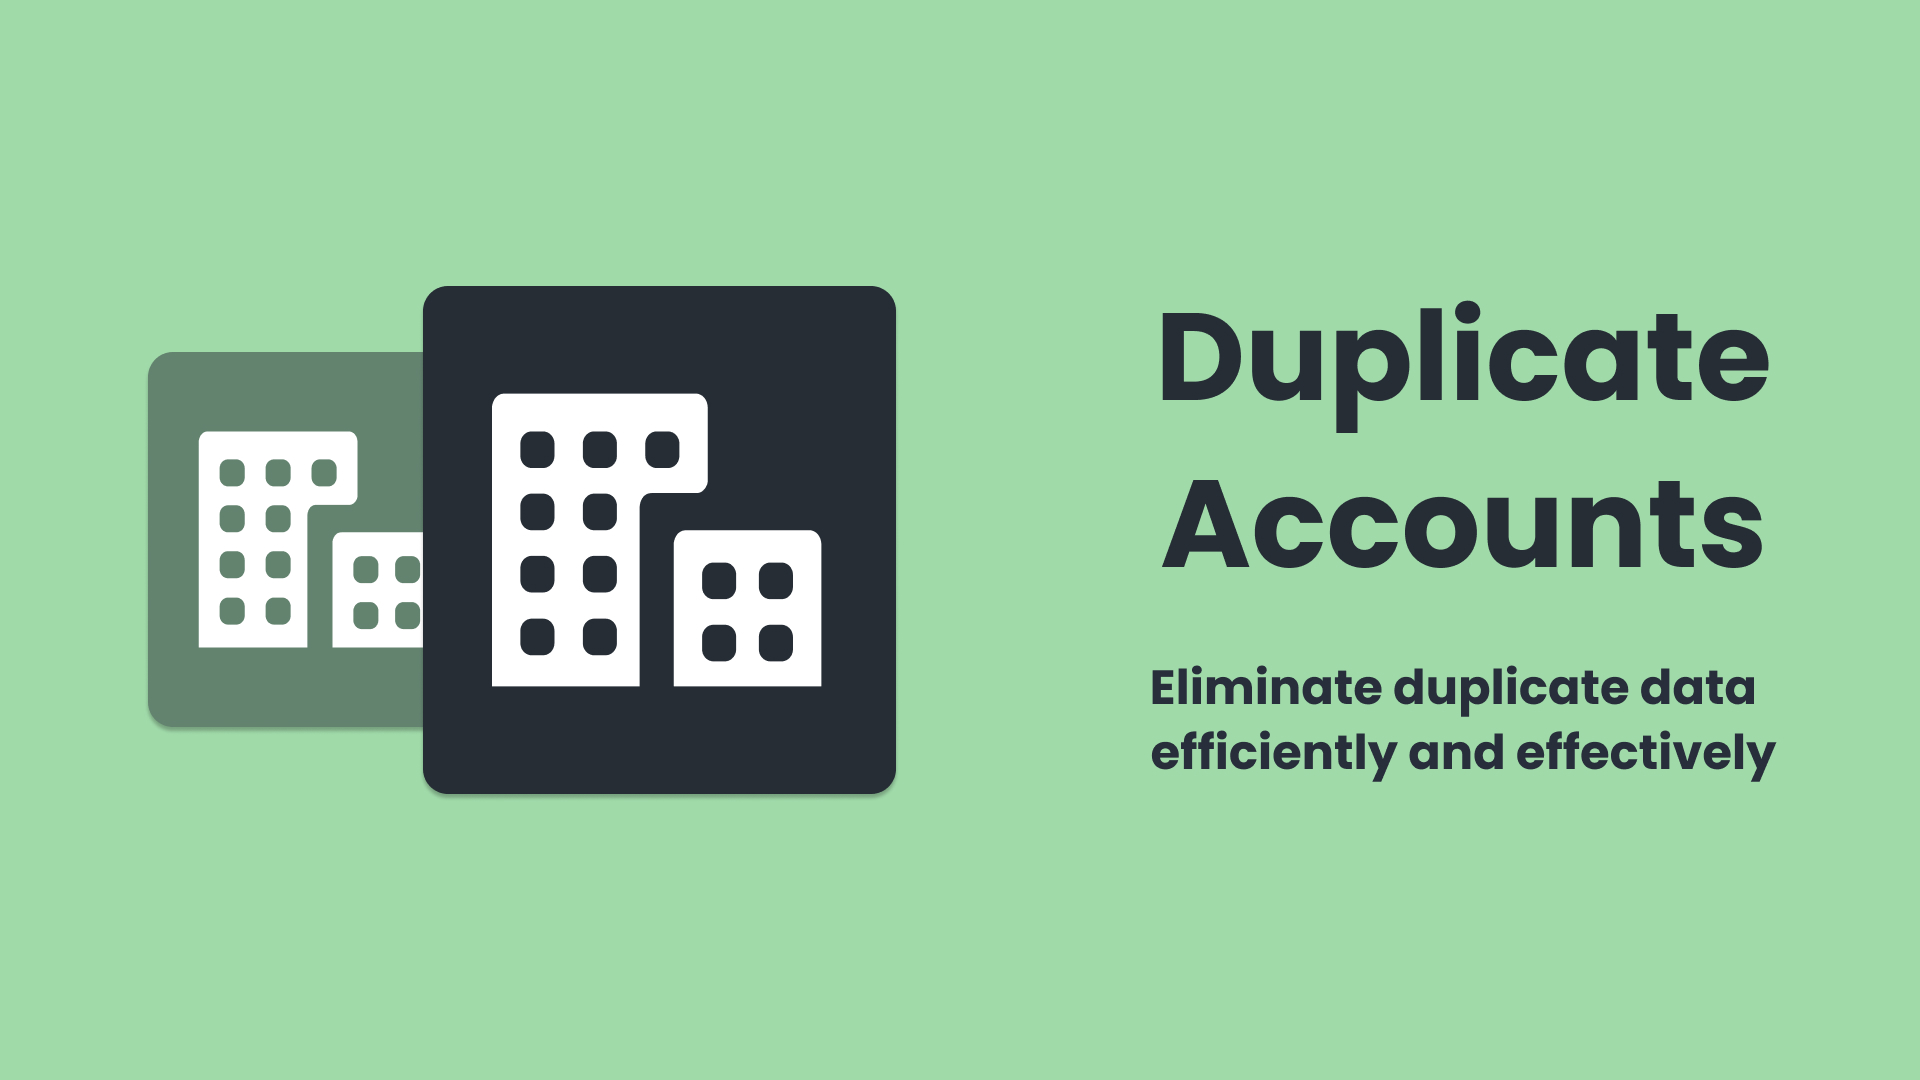 There is a duplicated image that represents the problem that the Delpha Duplicate Account conversation can detect and resolve for Salesforce Users.